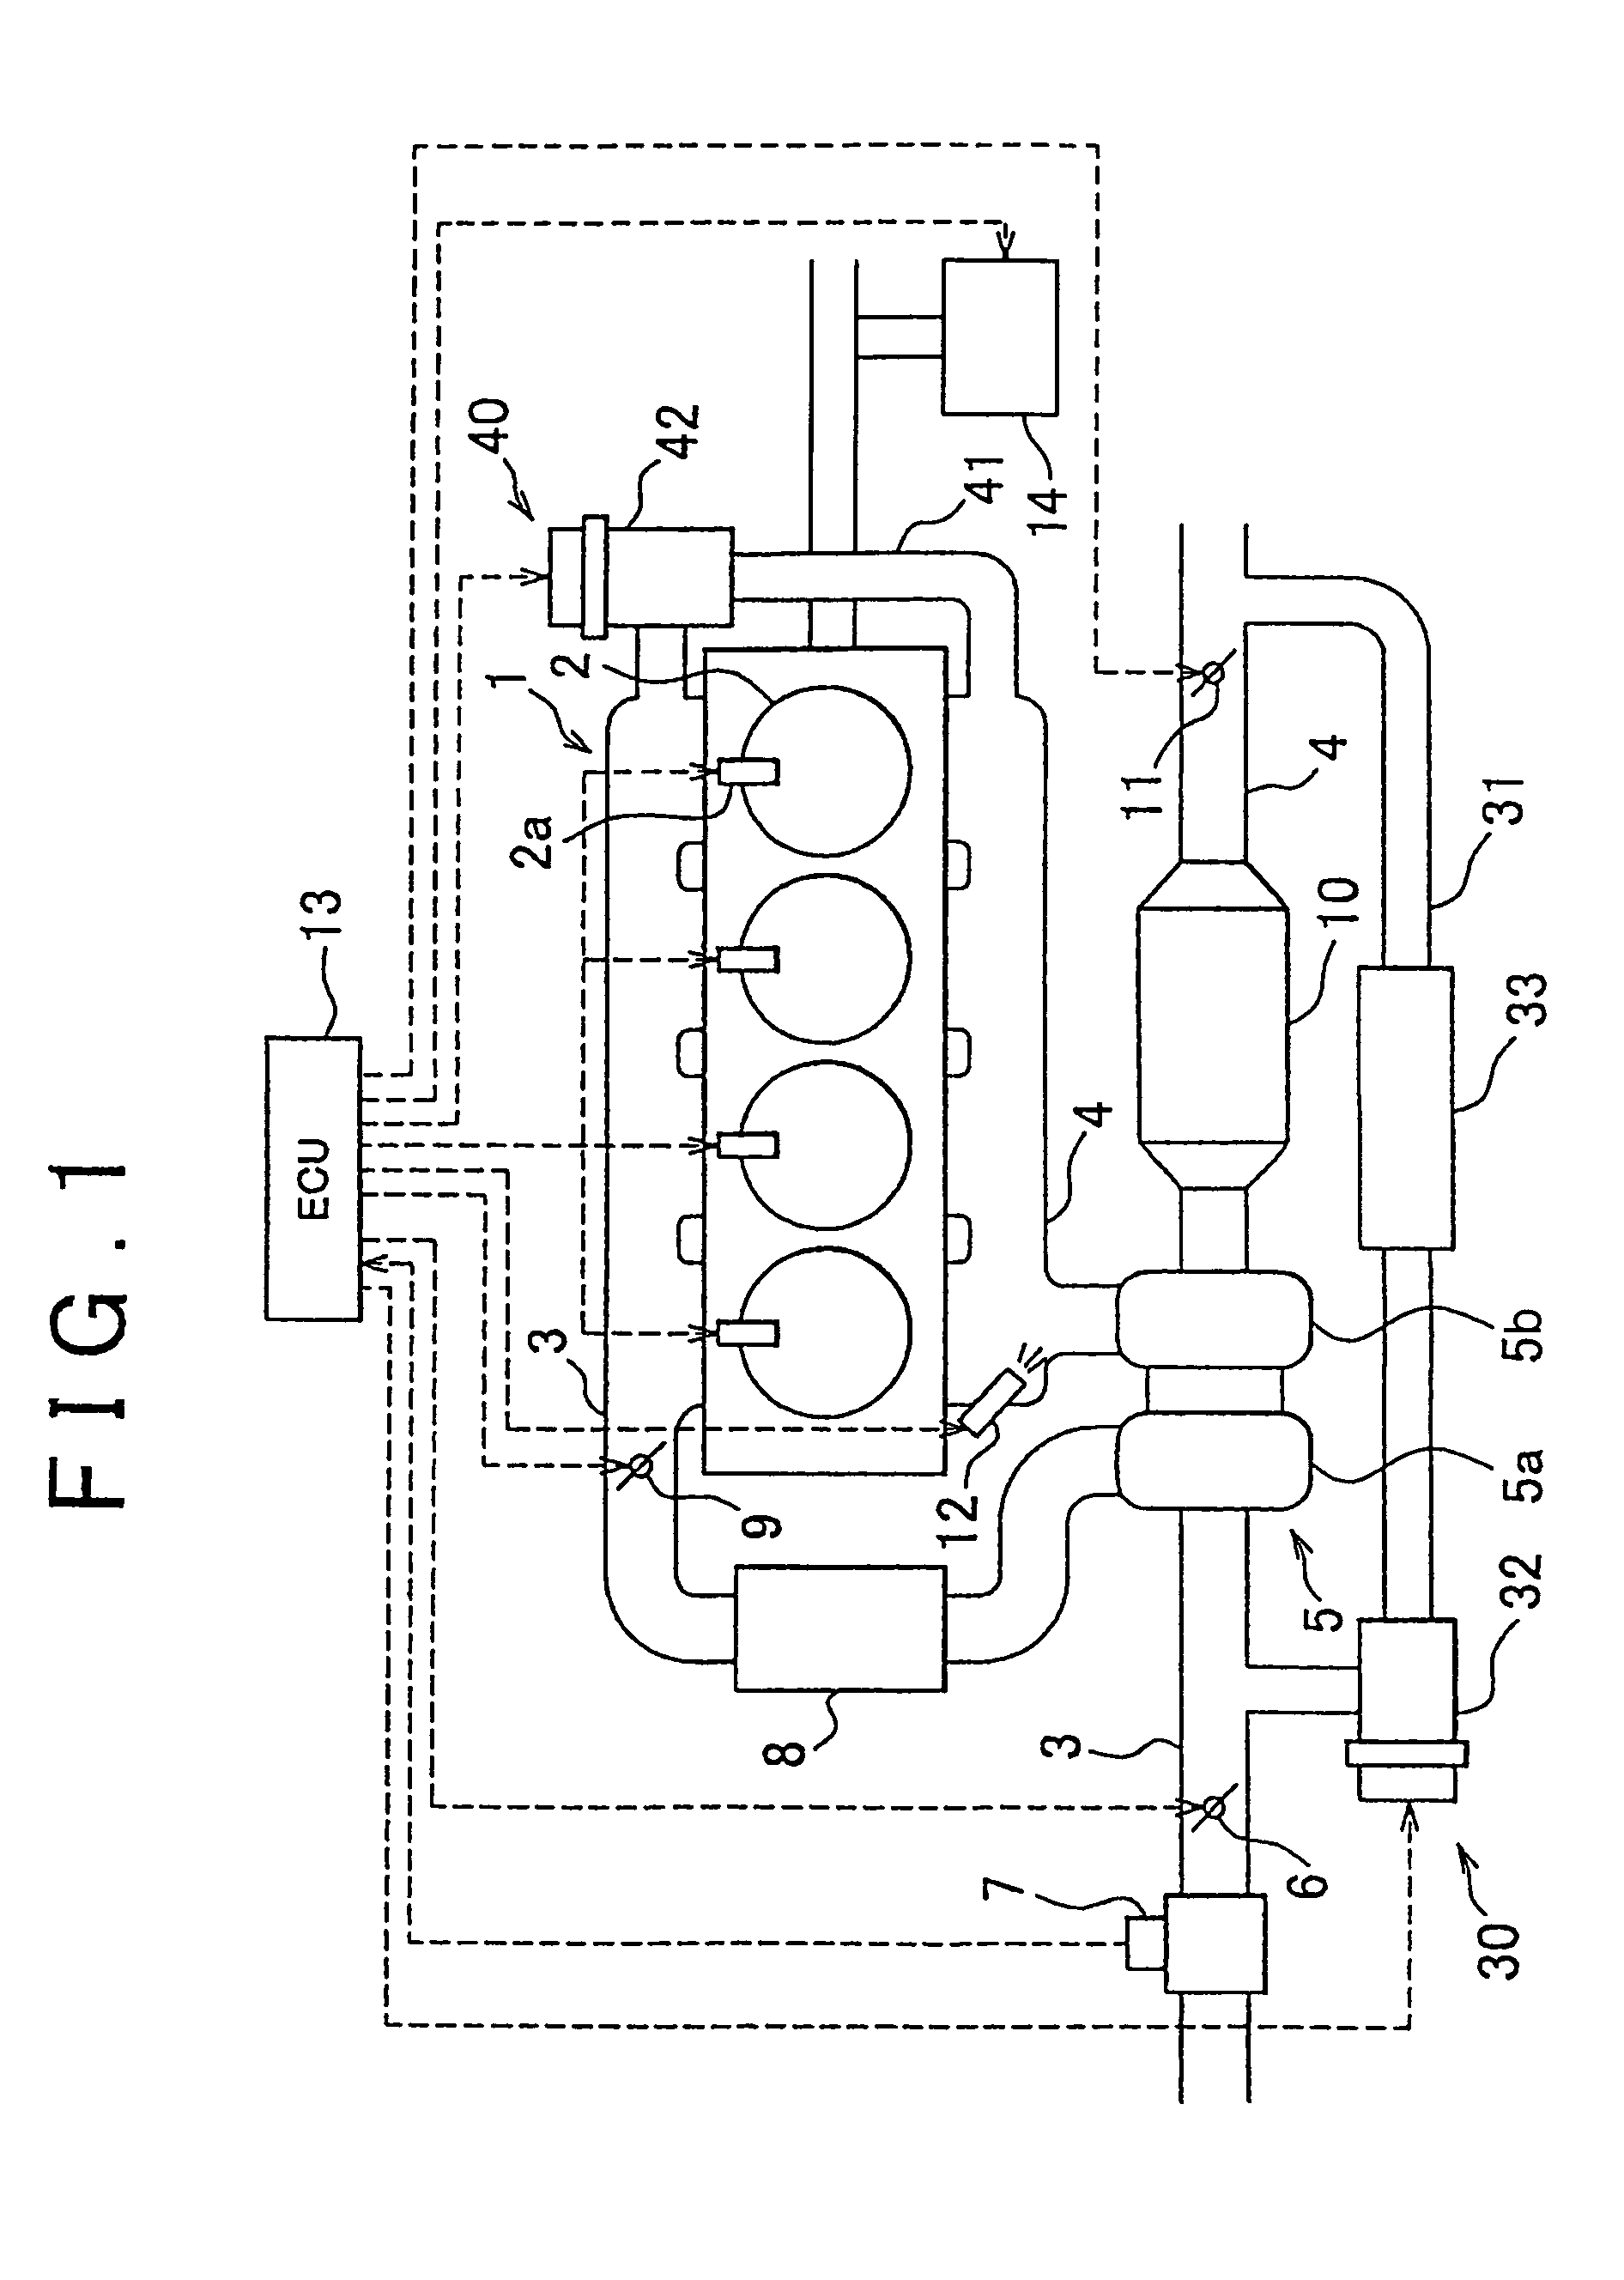 Internal combustion engine control device